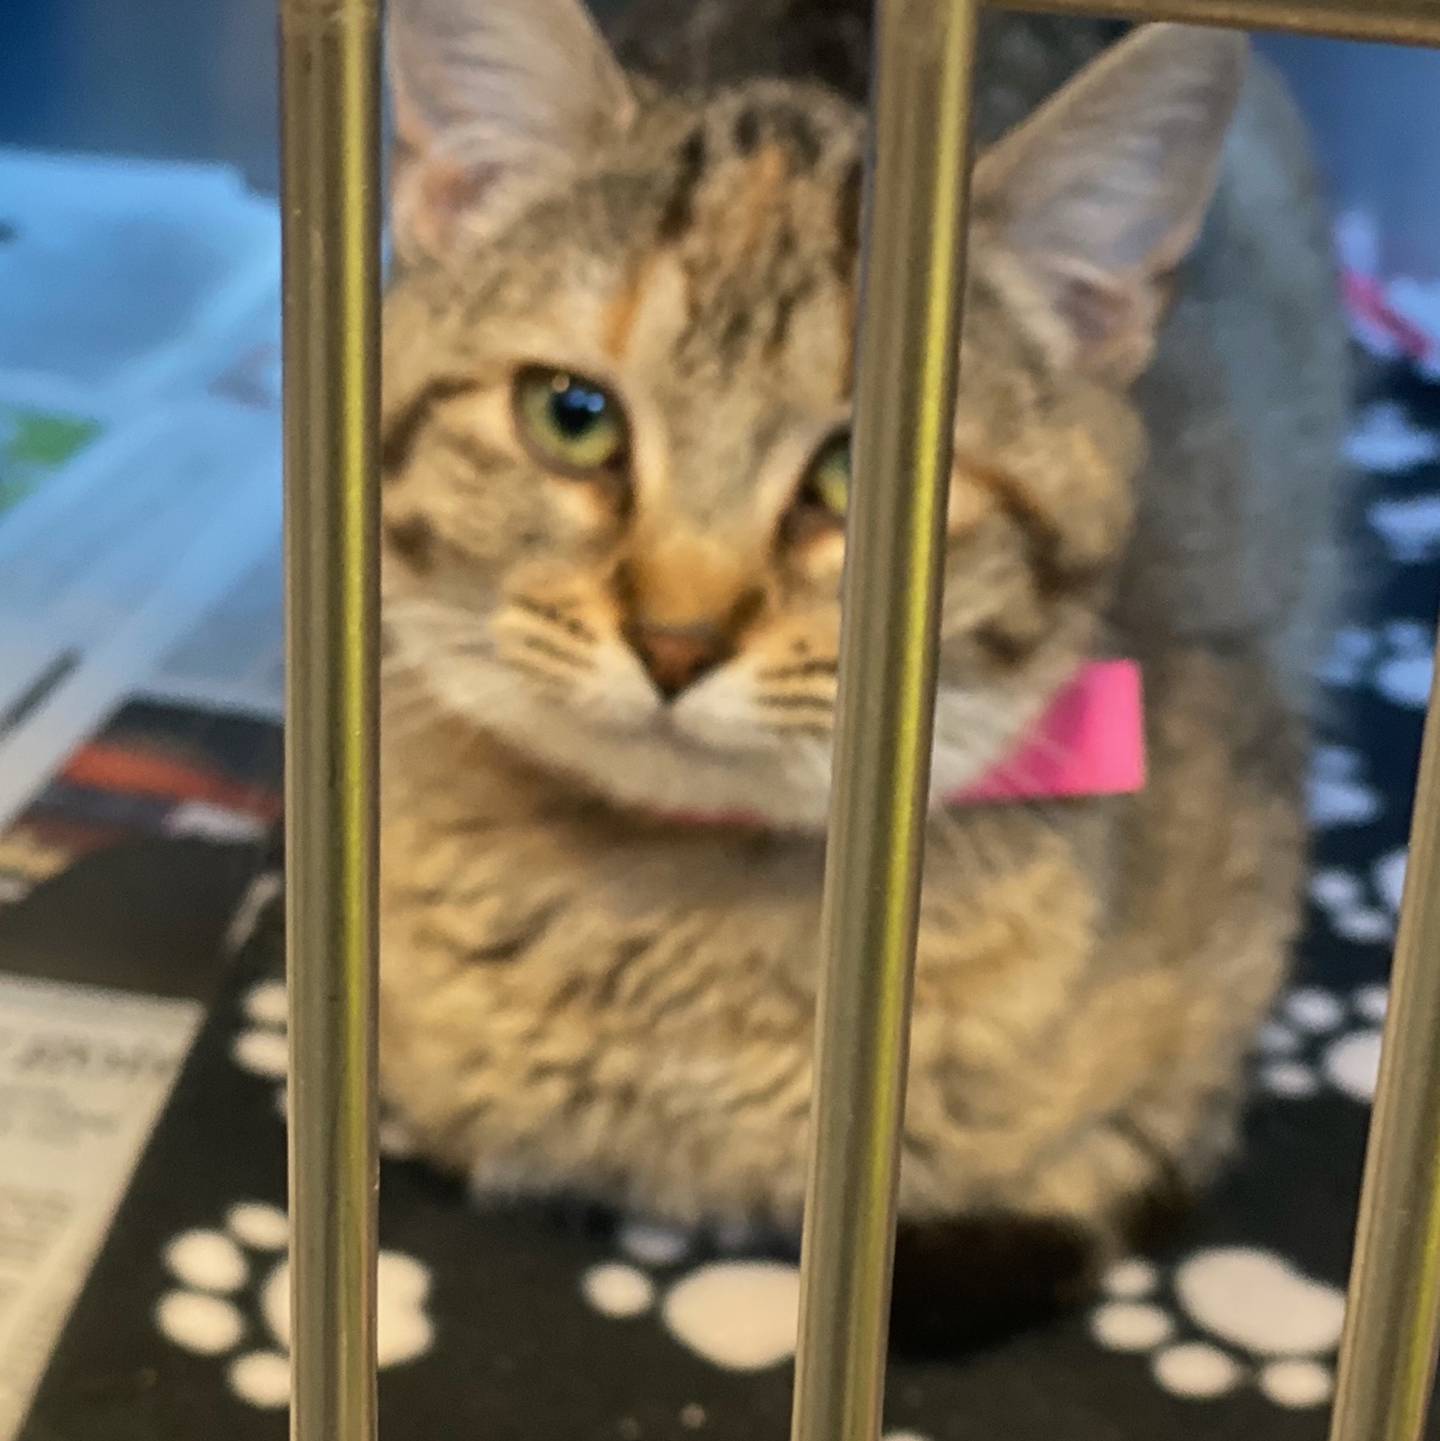 Kim is a 6-month-old domestic long-hair tabby who is very sweet and affectionate. Kim is super-friendly and gets along with other cats. She is looking for her forever home.